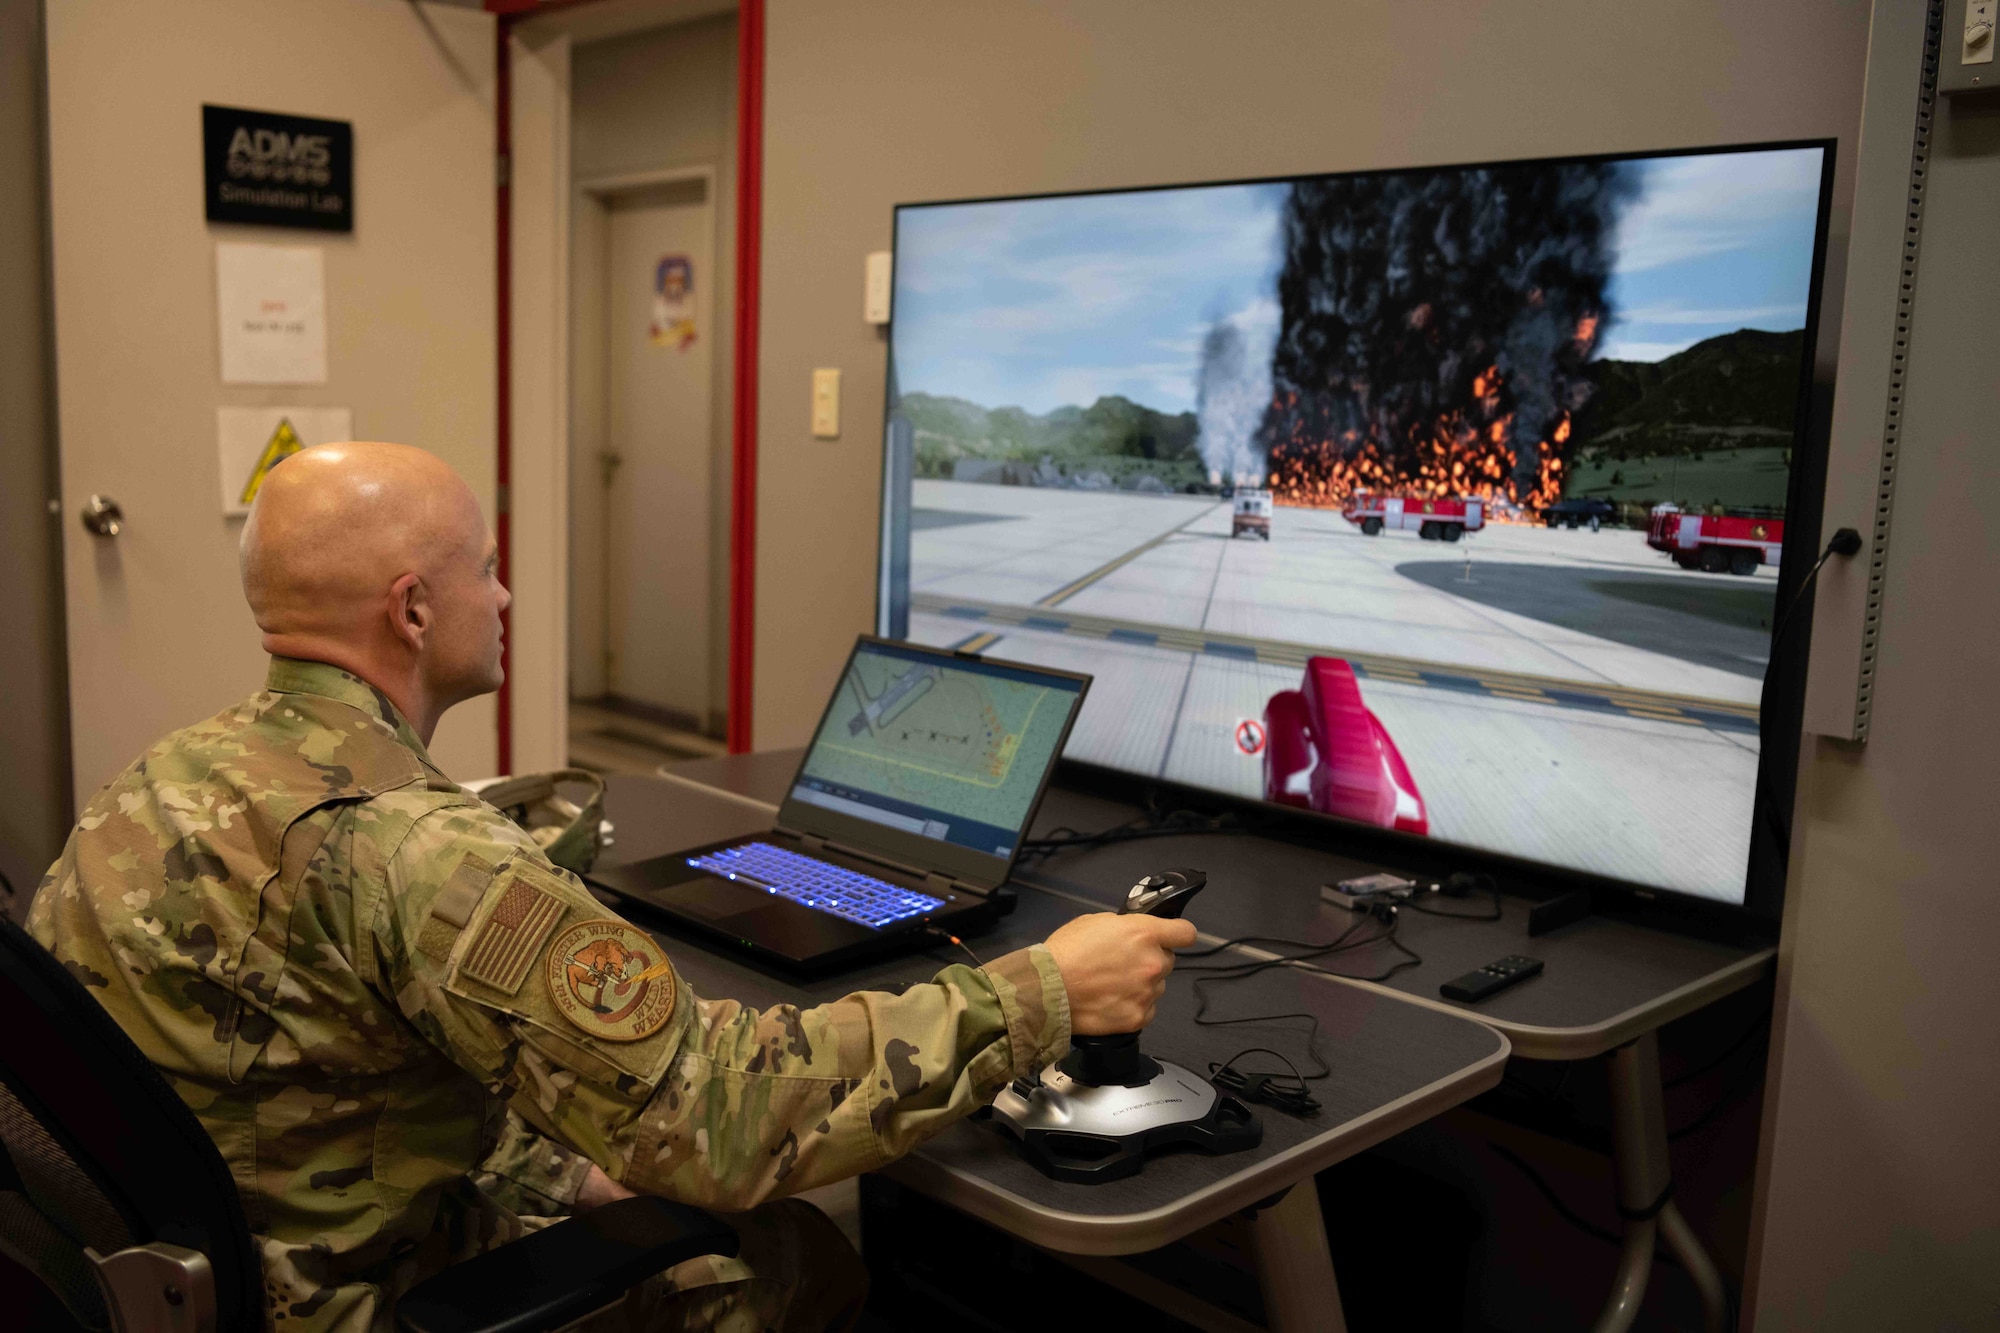 A military member sits behind a computer that trains firemen.